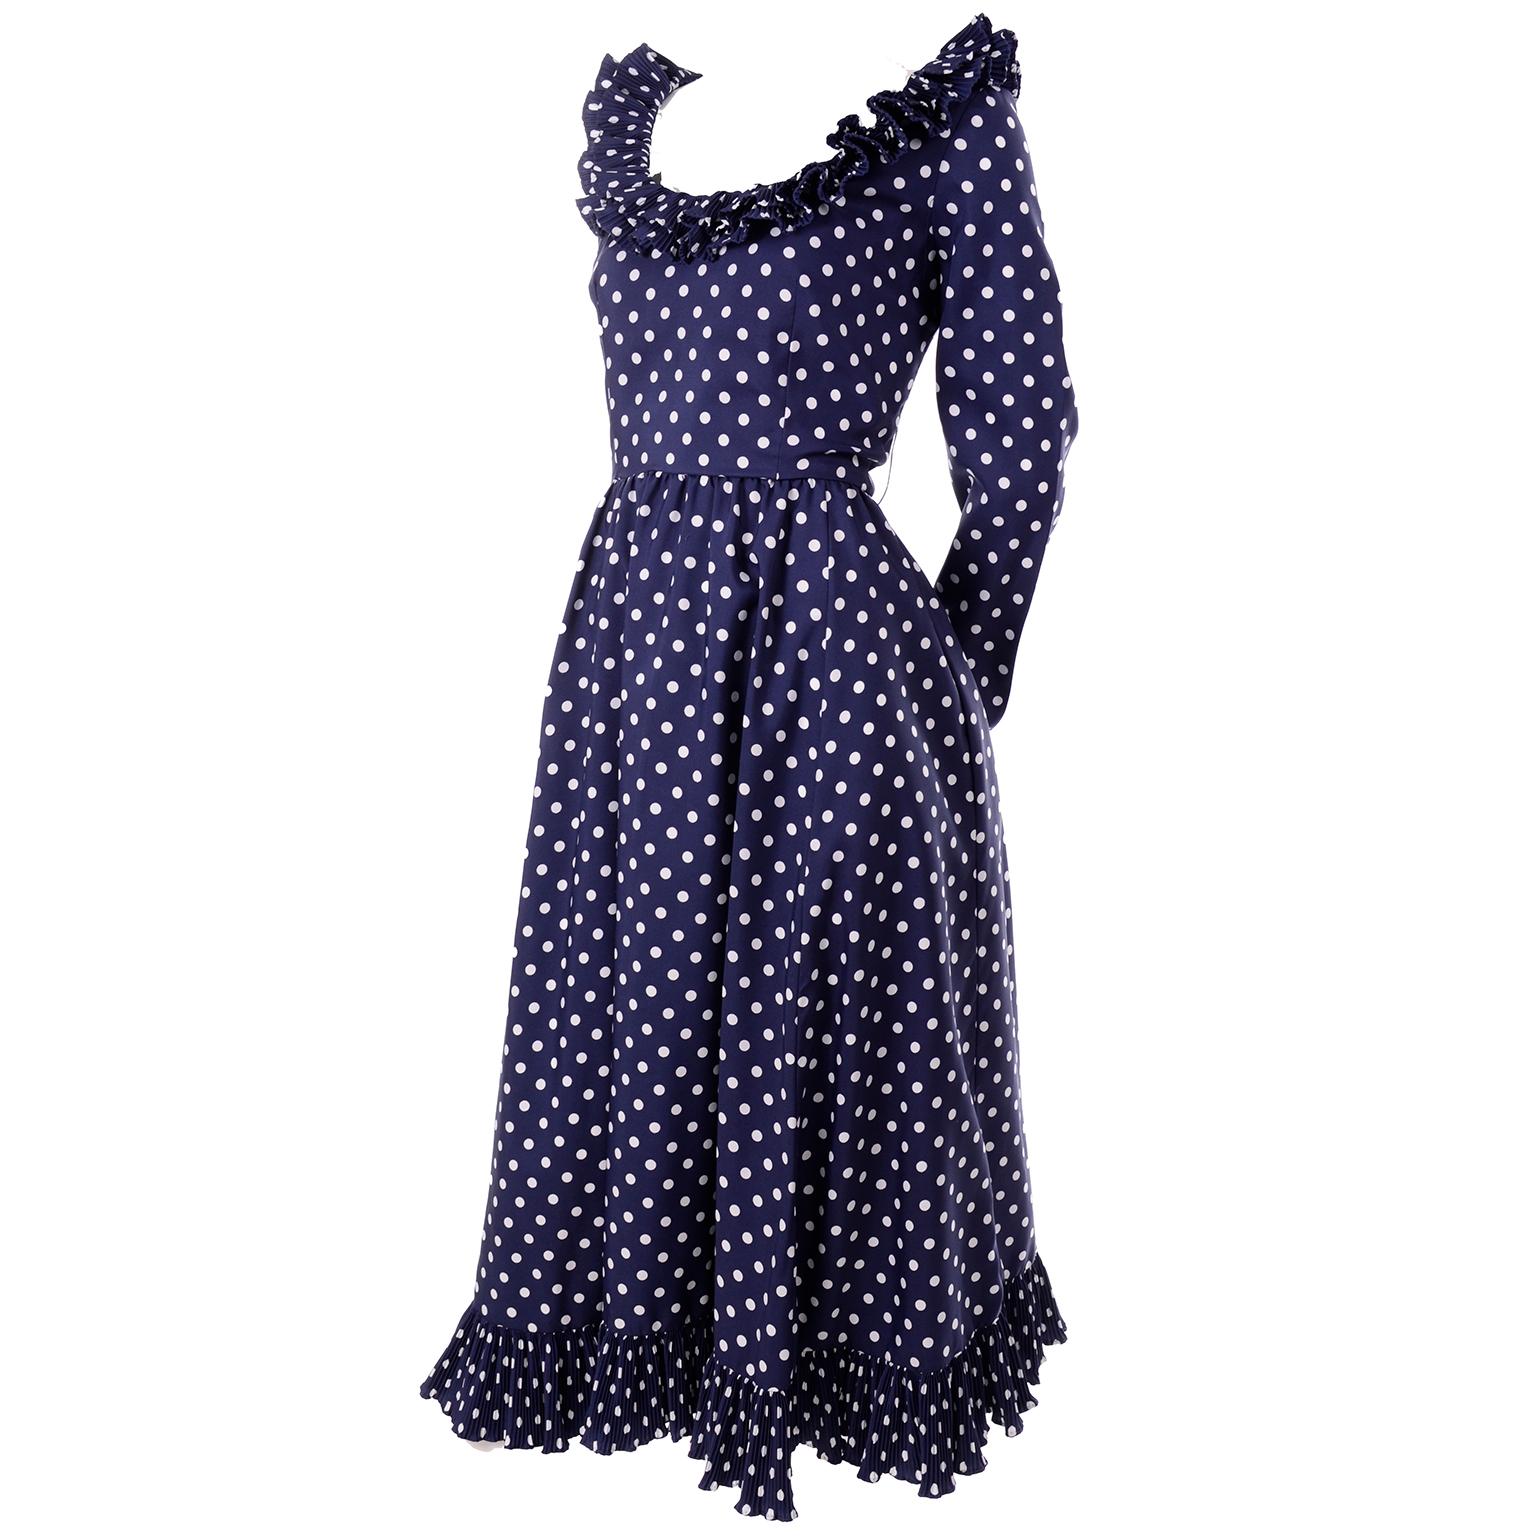 We love the playfulness of Victor Costa dresses! This late 1970's long blue maxi dress with white polka dots is no exception! It has pleated ruffles in layers around the scoop neck, and along the cuffs and hem. The full skirt hits about ankle length